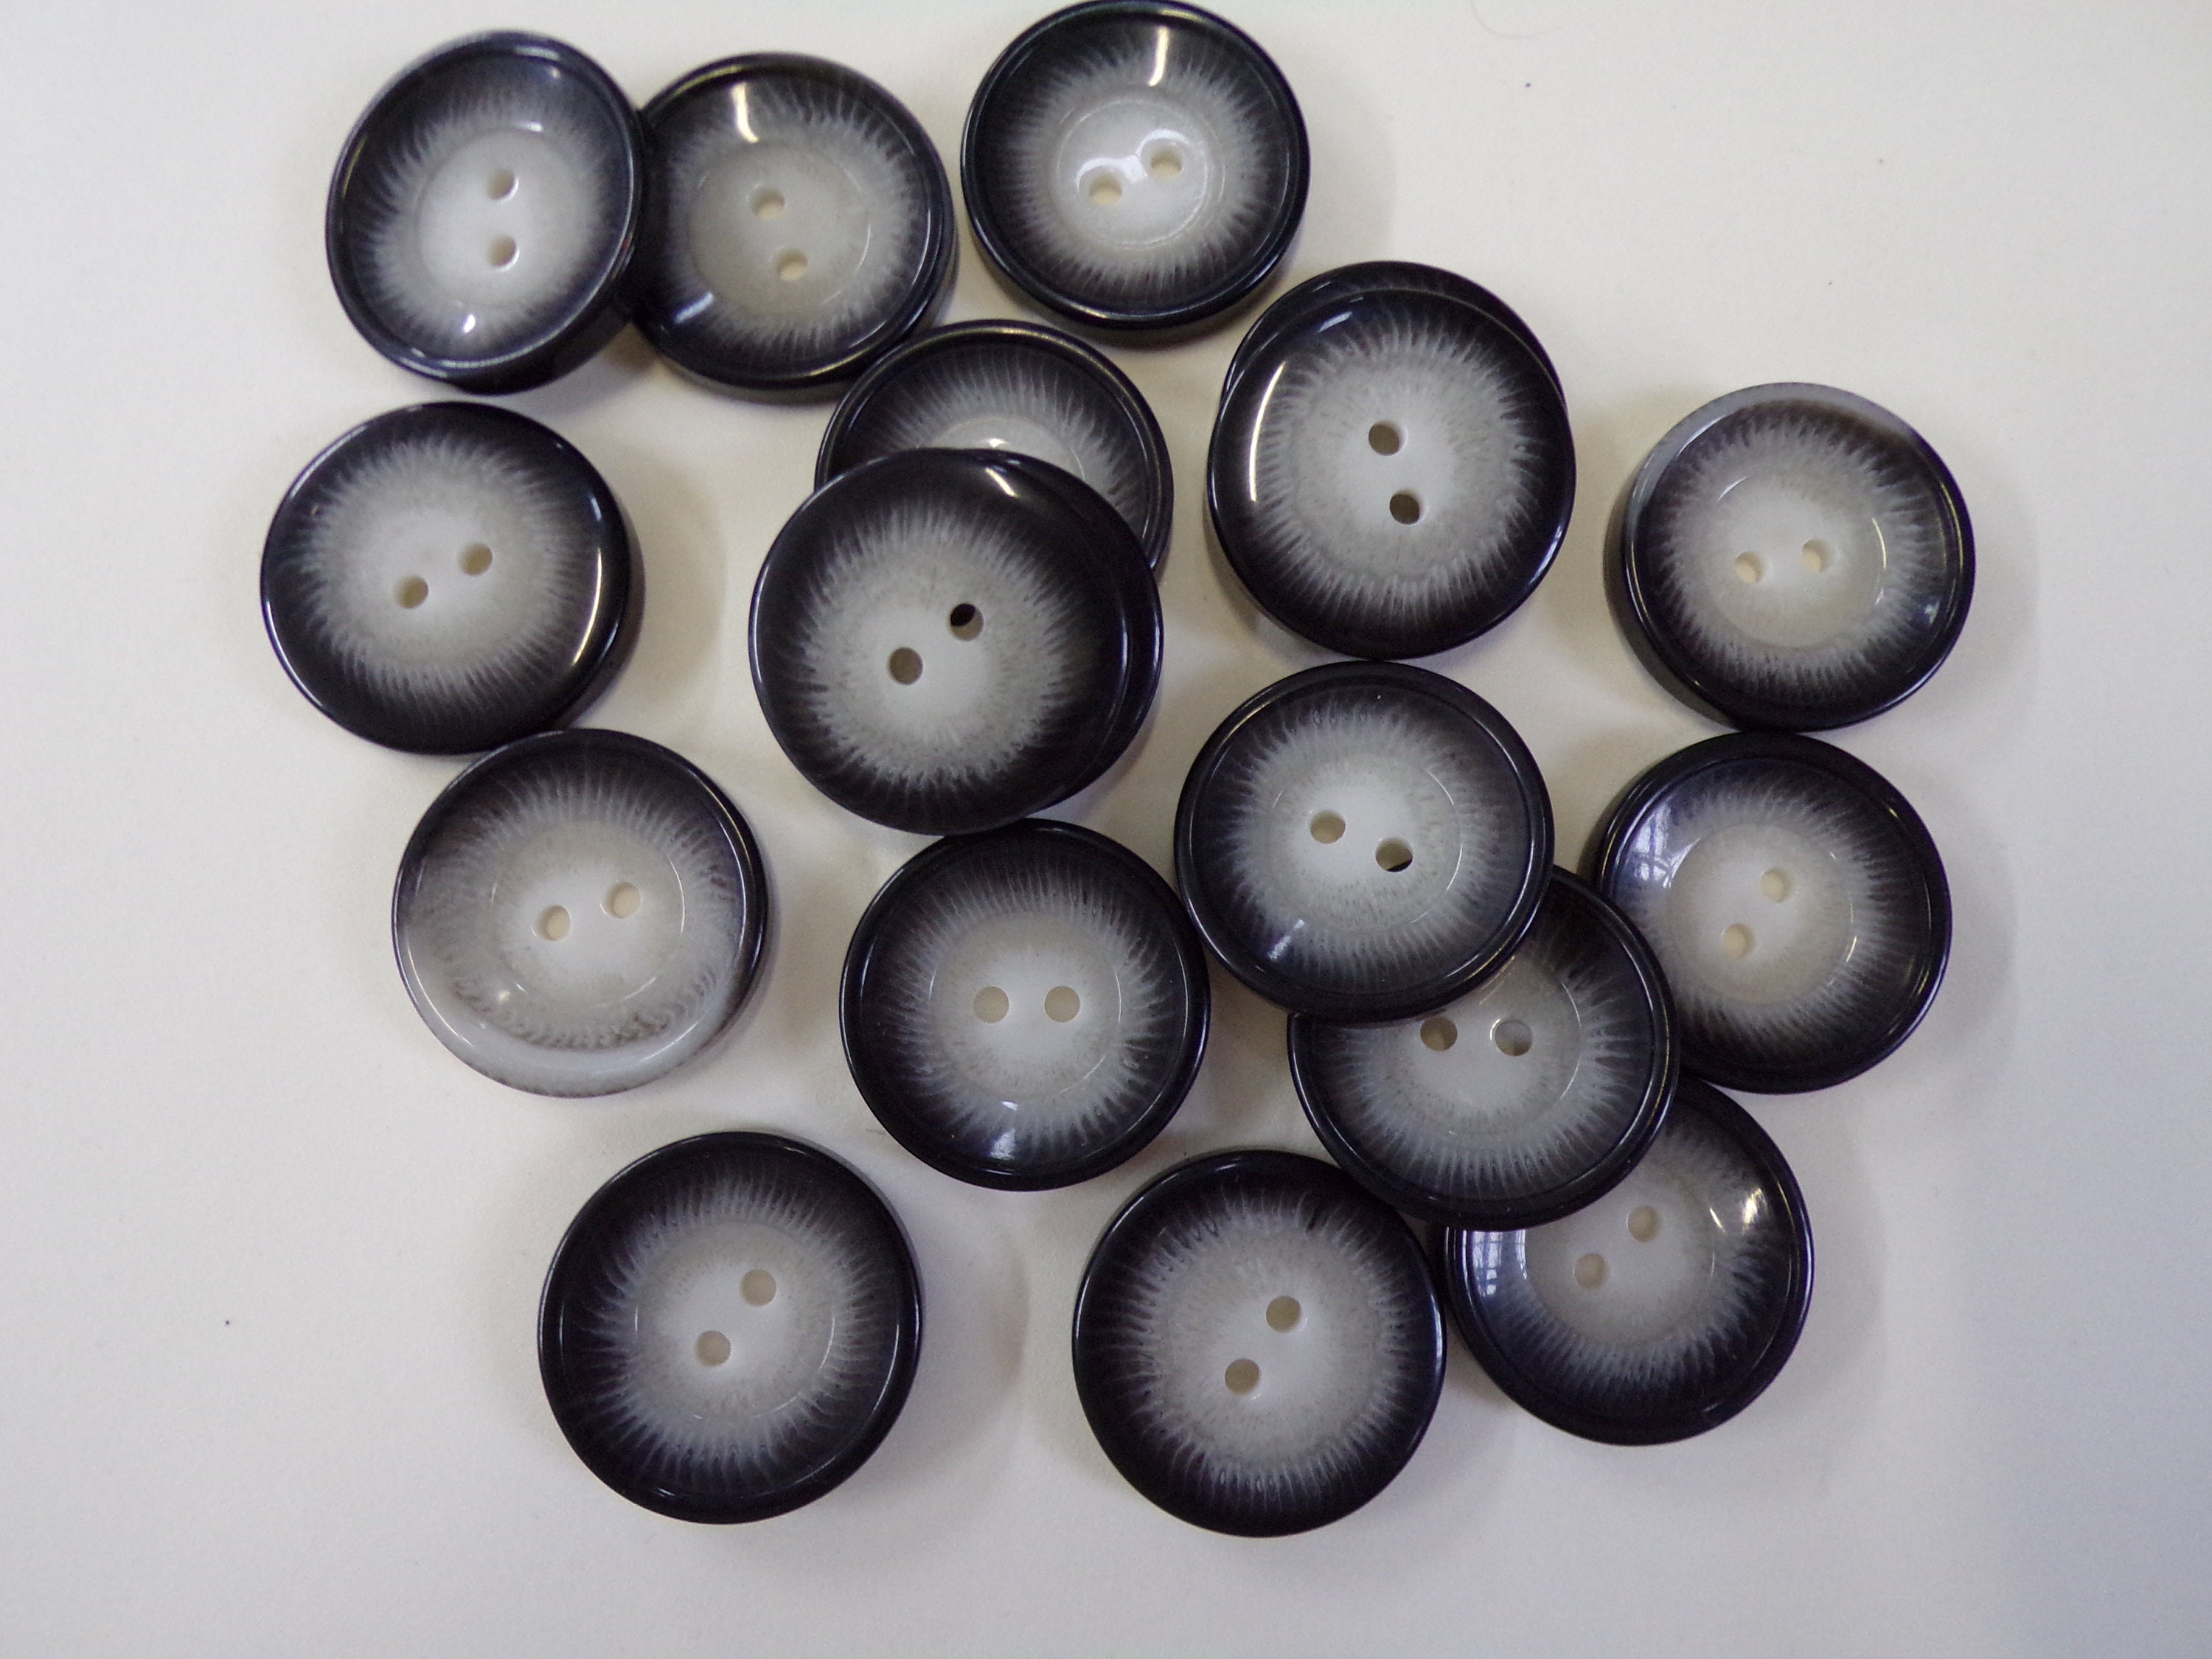 80pcs Large Black Buttons for Sewing Resin 3/4 inch Buttons for Crafts Black Coat Buttons Coraline 4 Holes Round Big Buttons for Sewing, DIY and